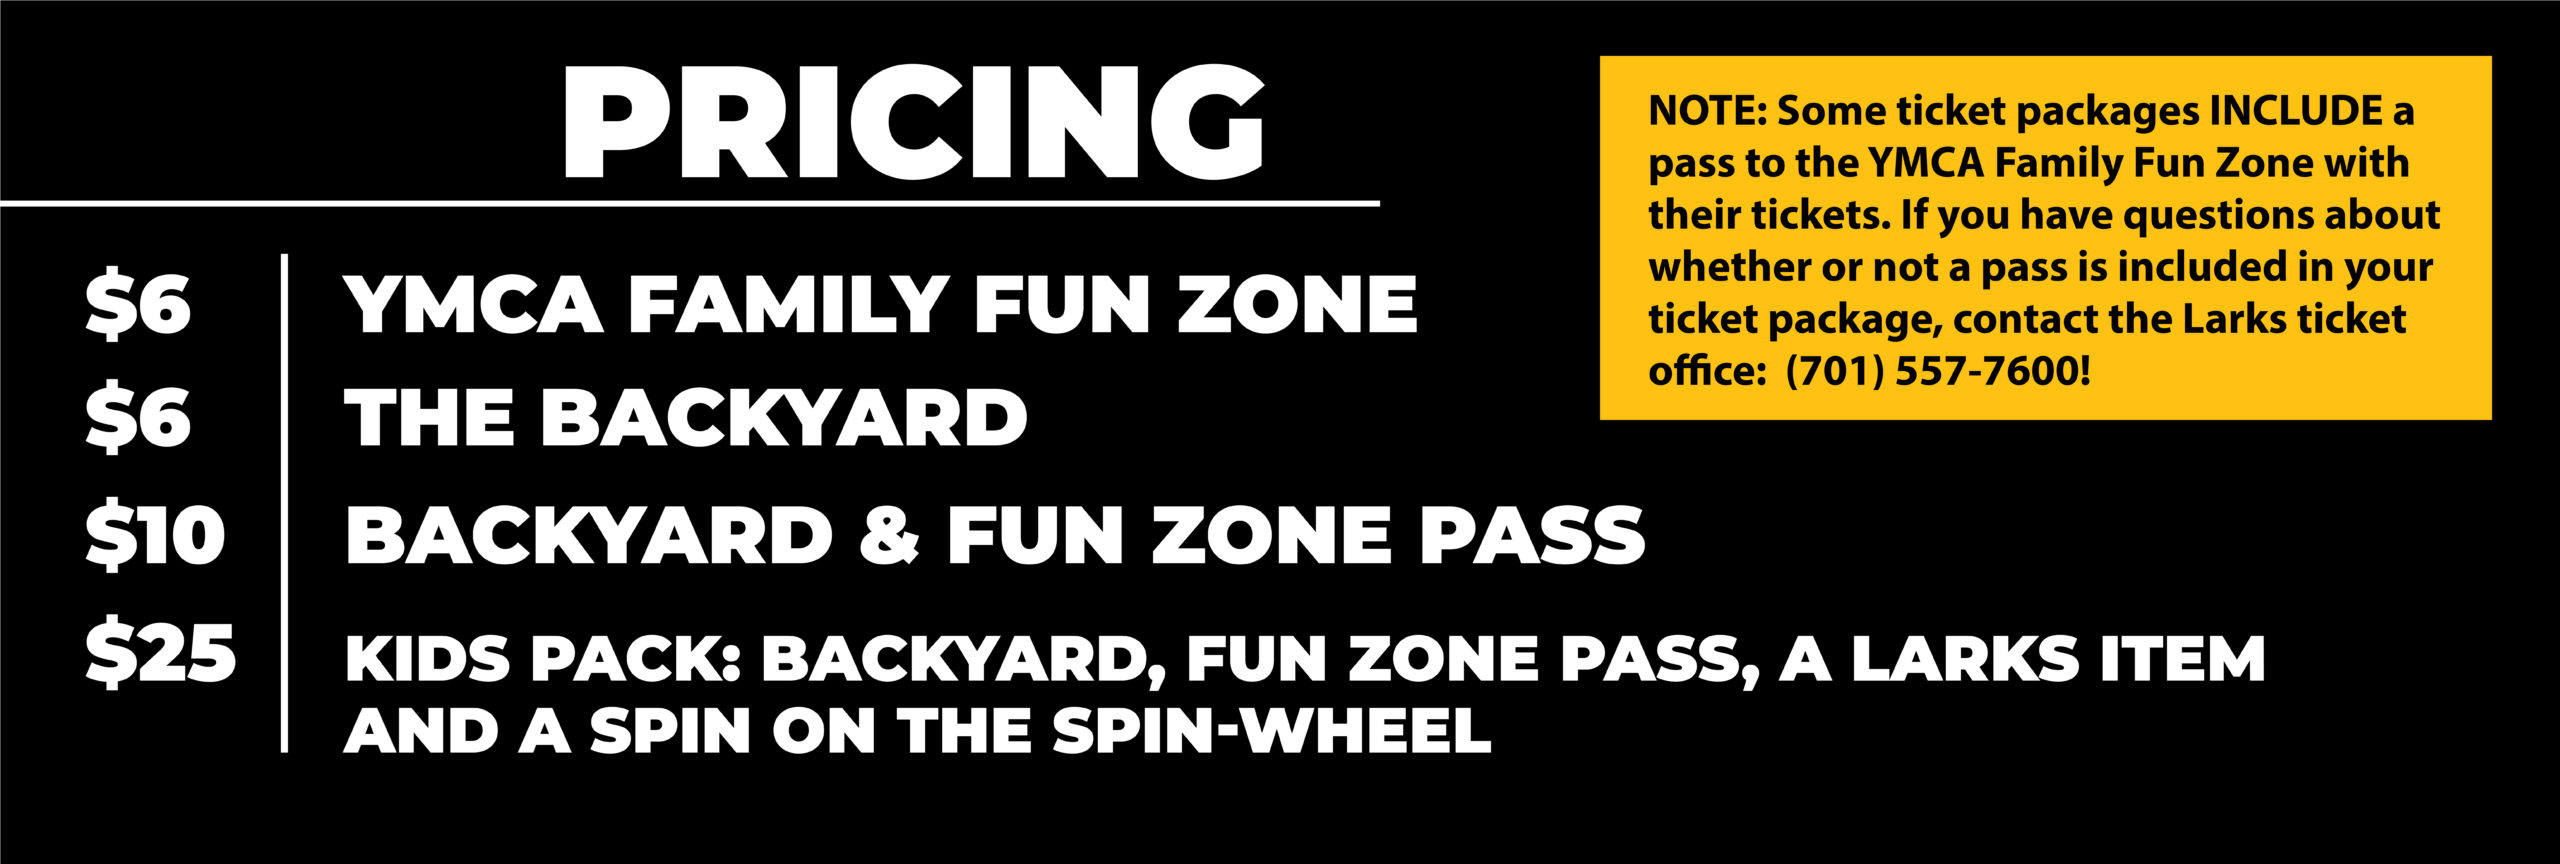 prices for fun zone and backyard